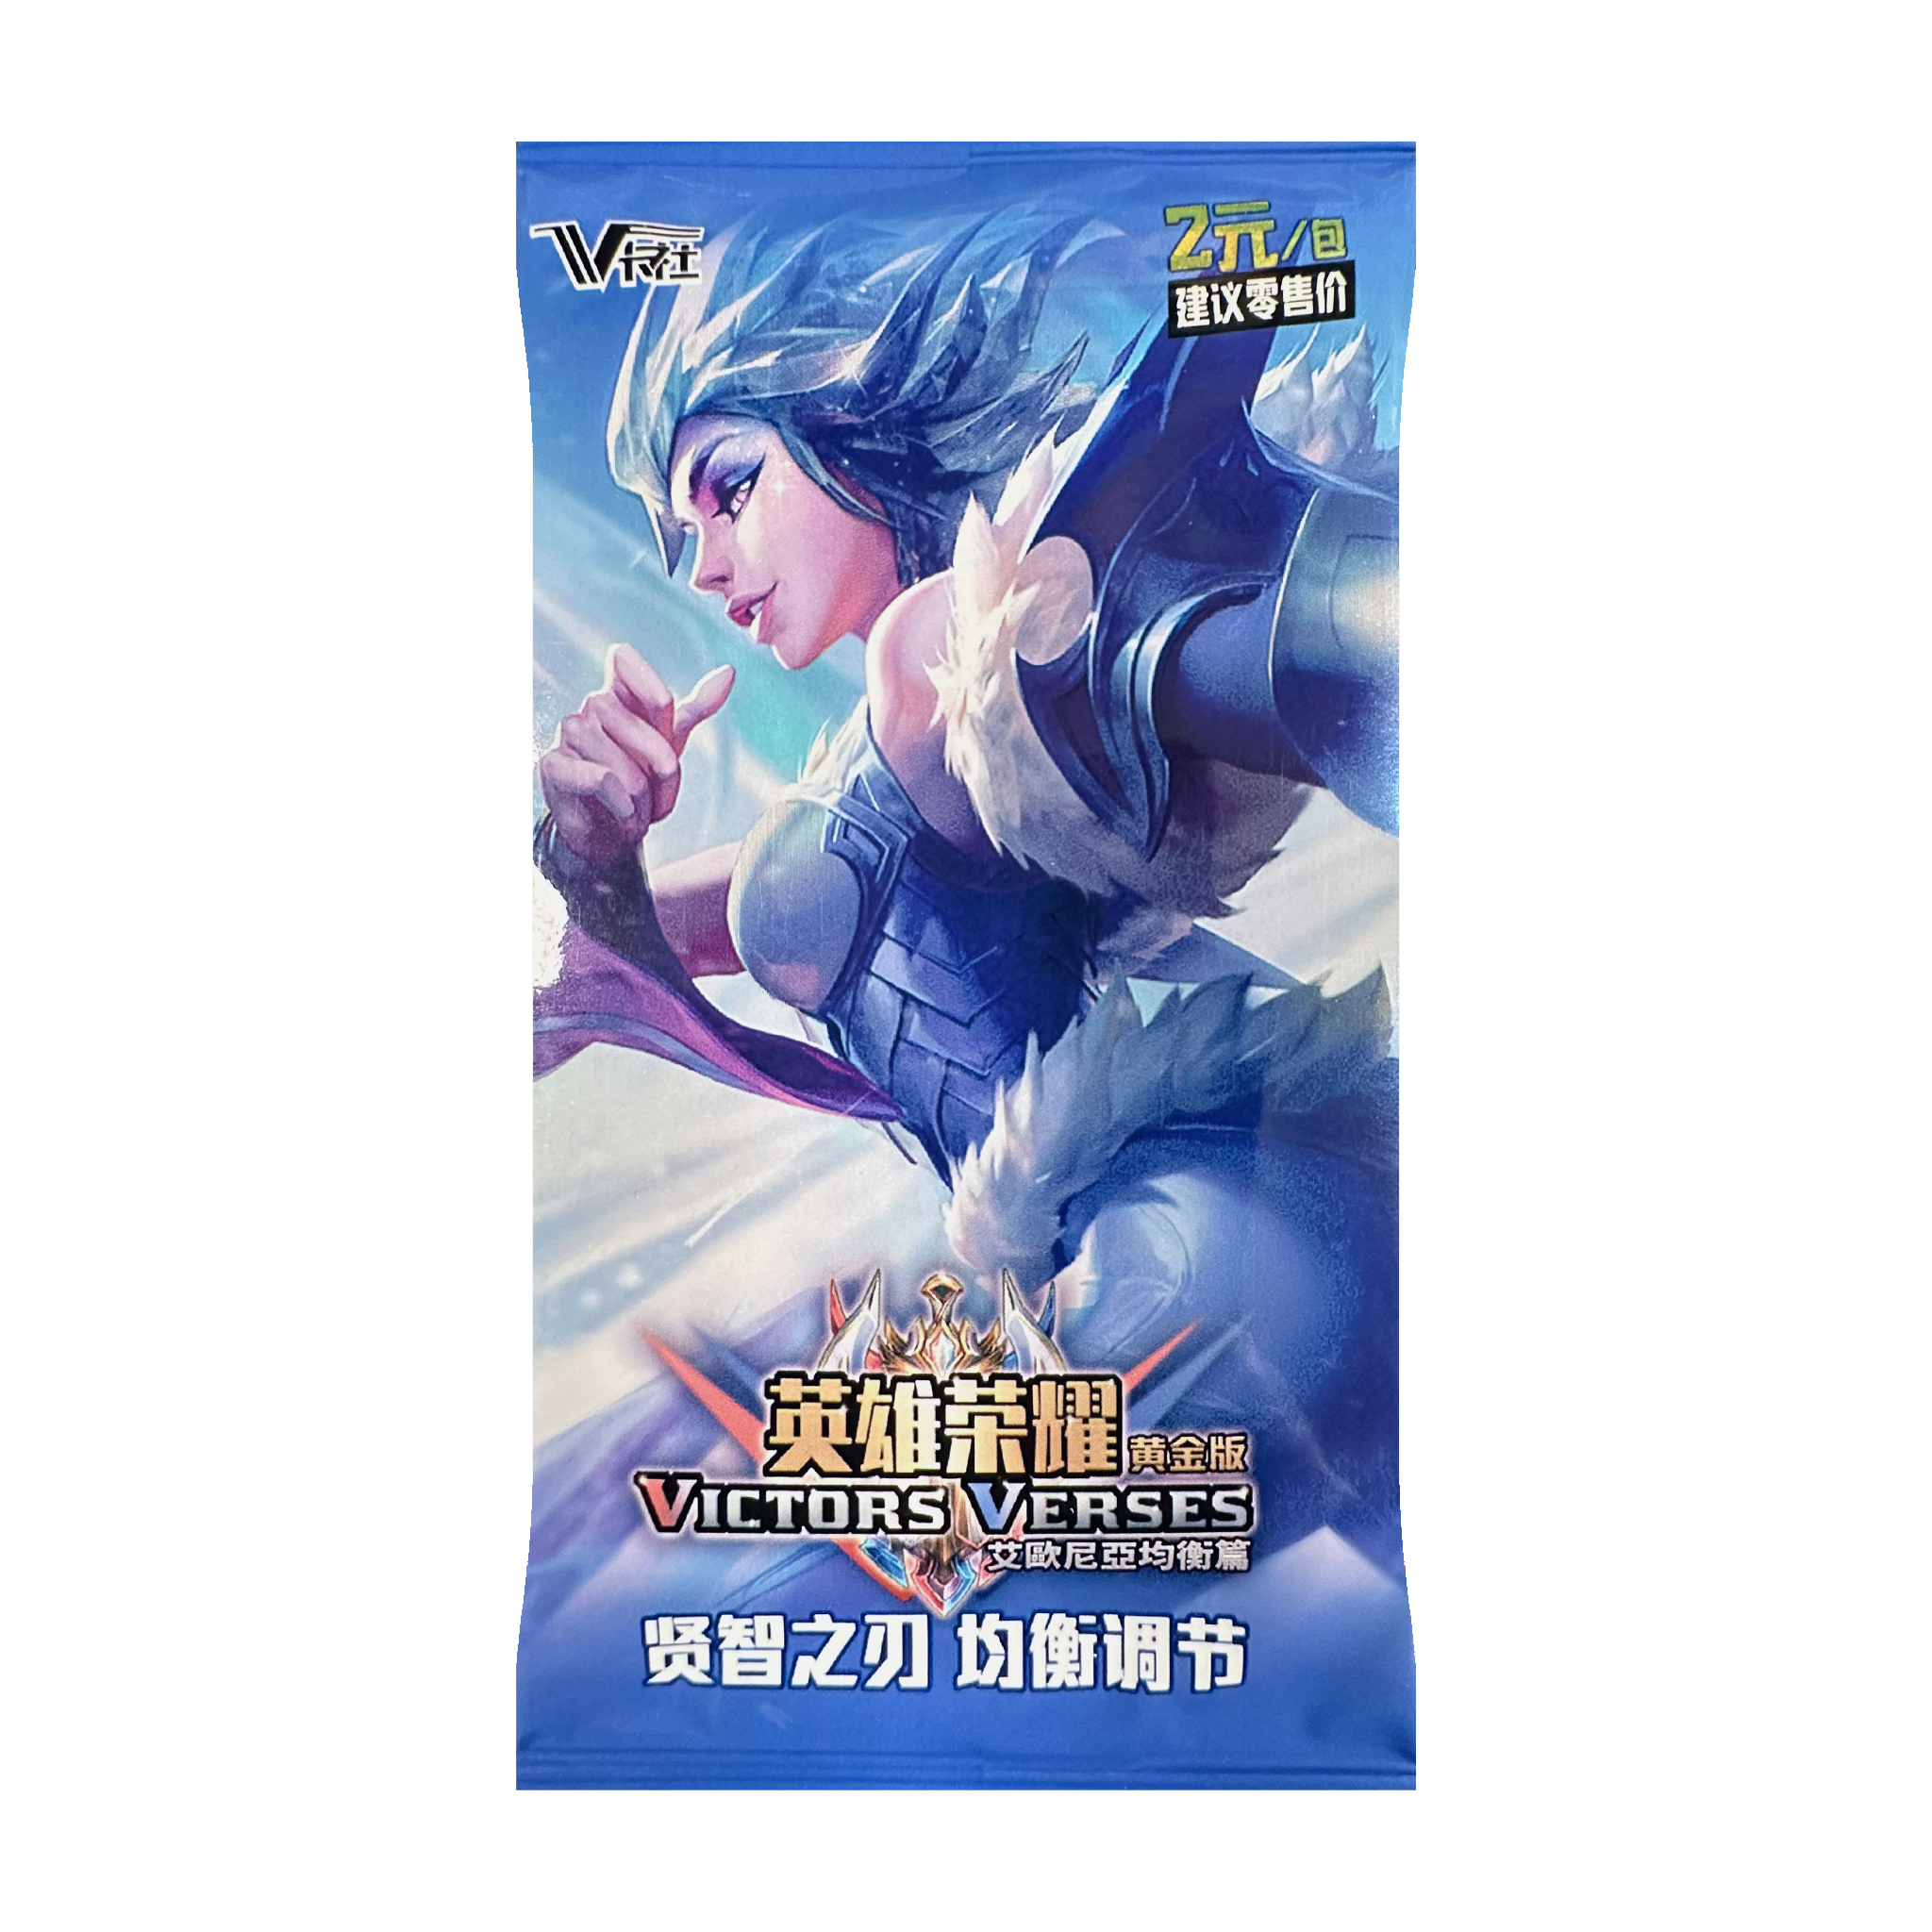 League of Legends Victor Verses Set 2 Booster Pack